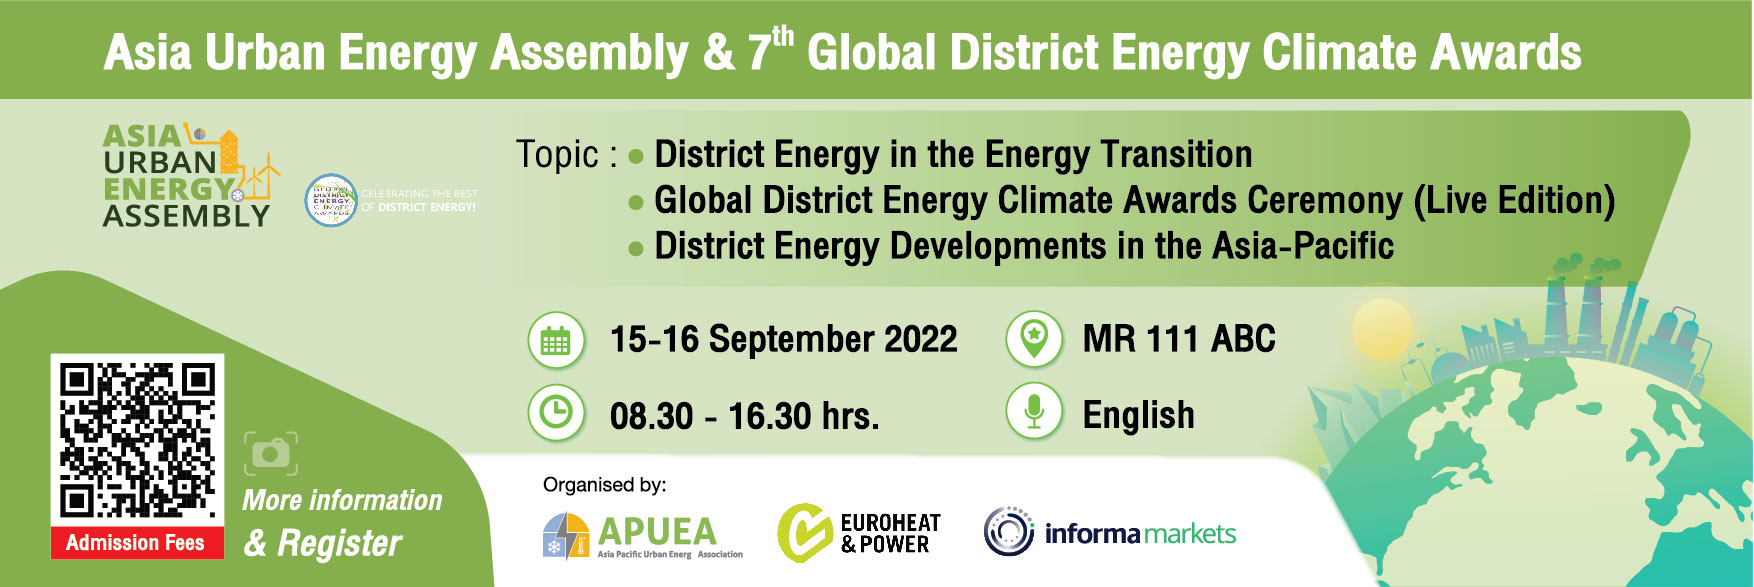 Asia Urban Energy Assembly & 7th Global Energy Climate Awards